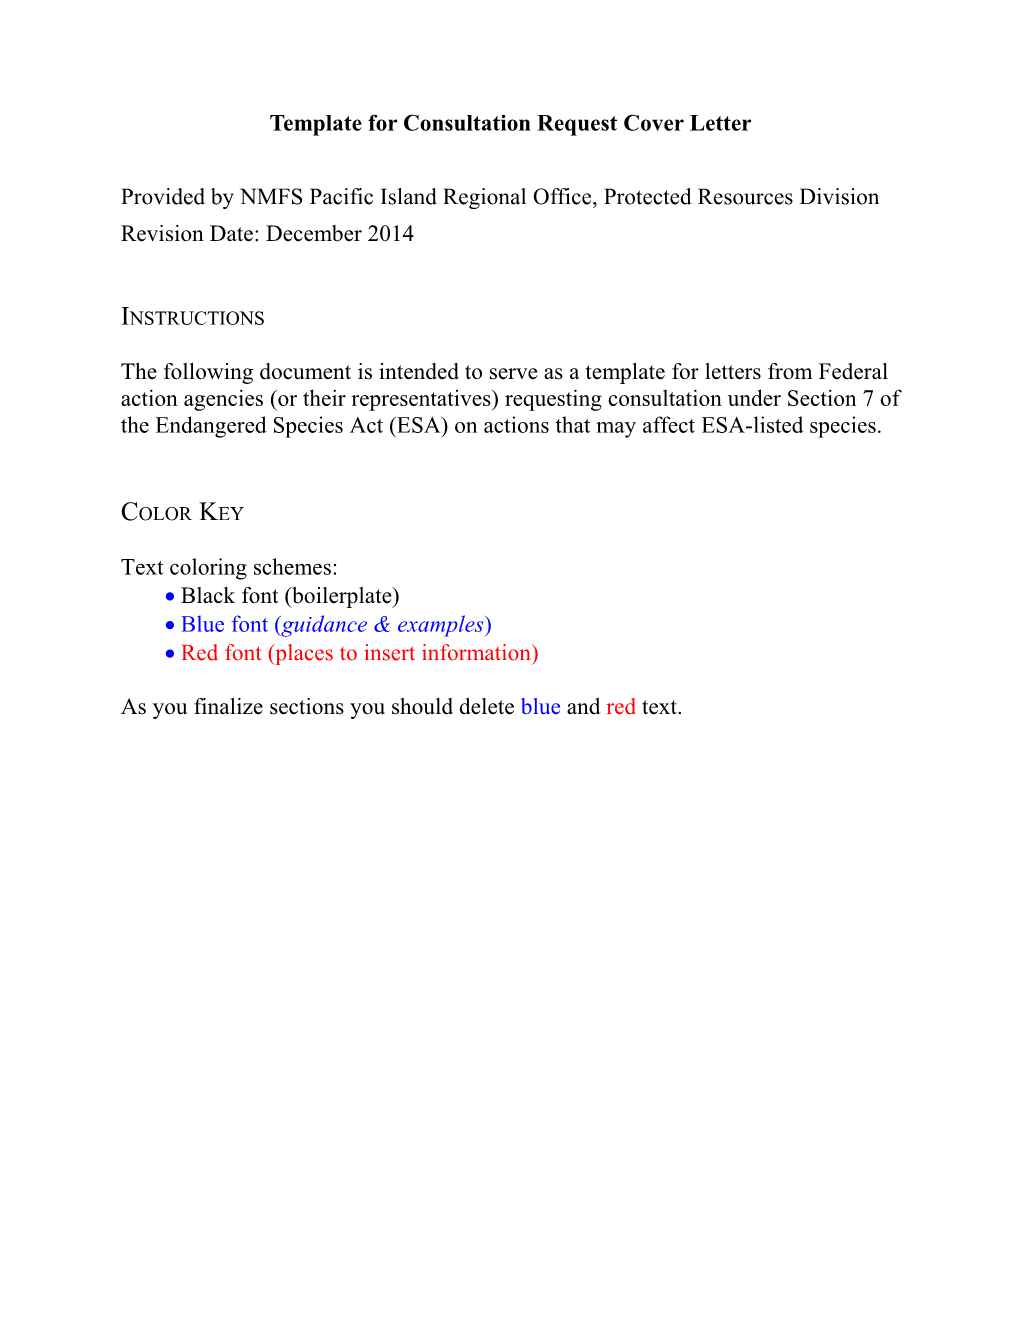 Template for Consultation Request Cover Letter